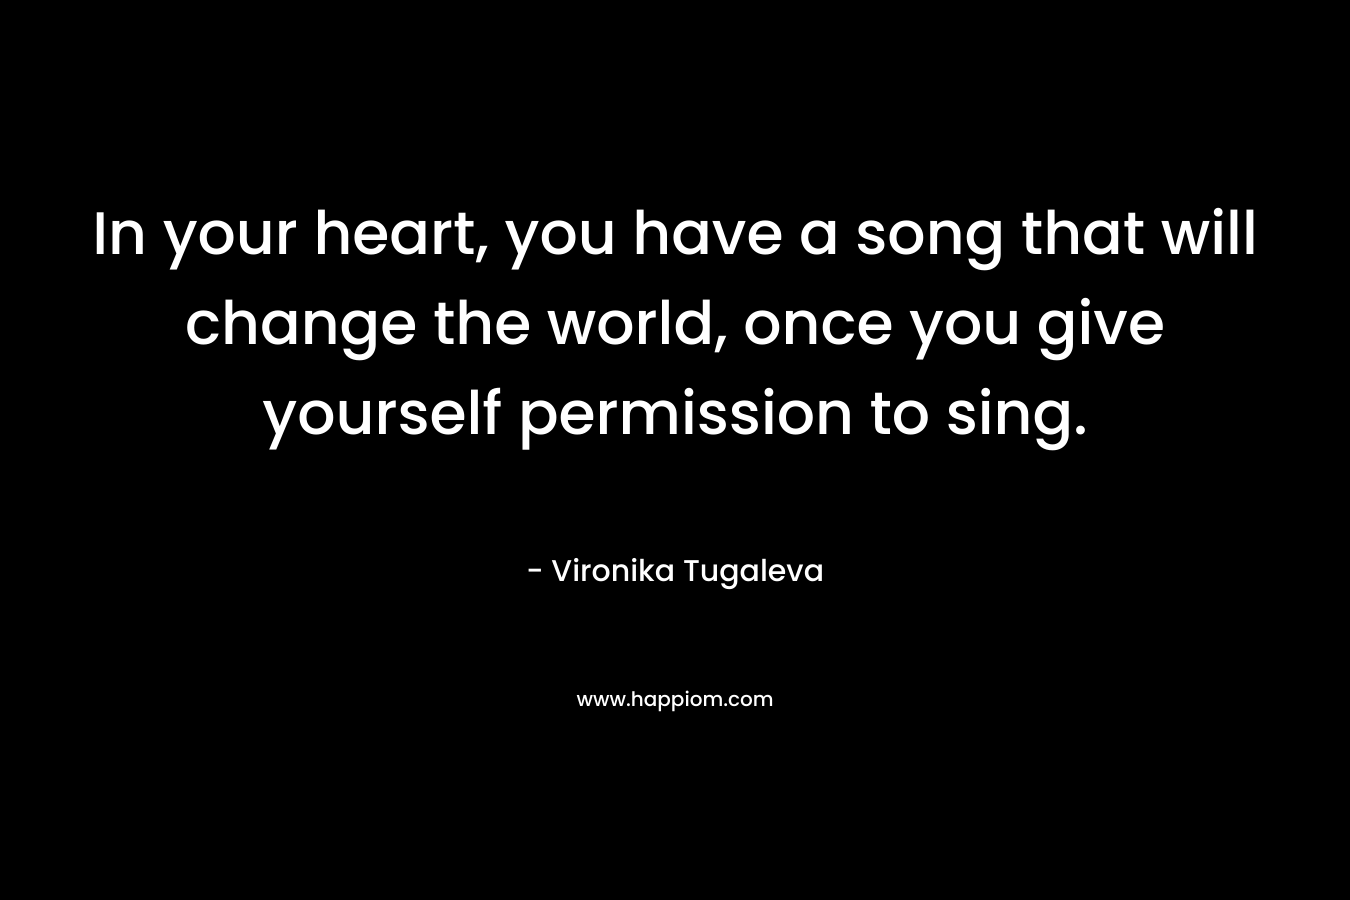 In your heart, you have a song that will change the world, once you give yourself permission to sing.